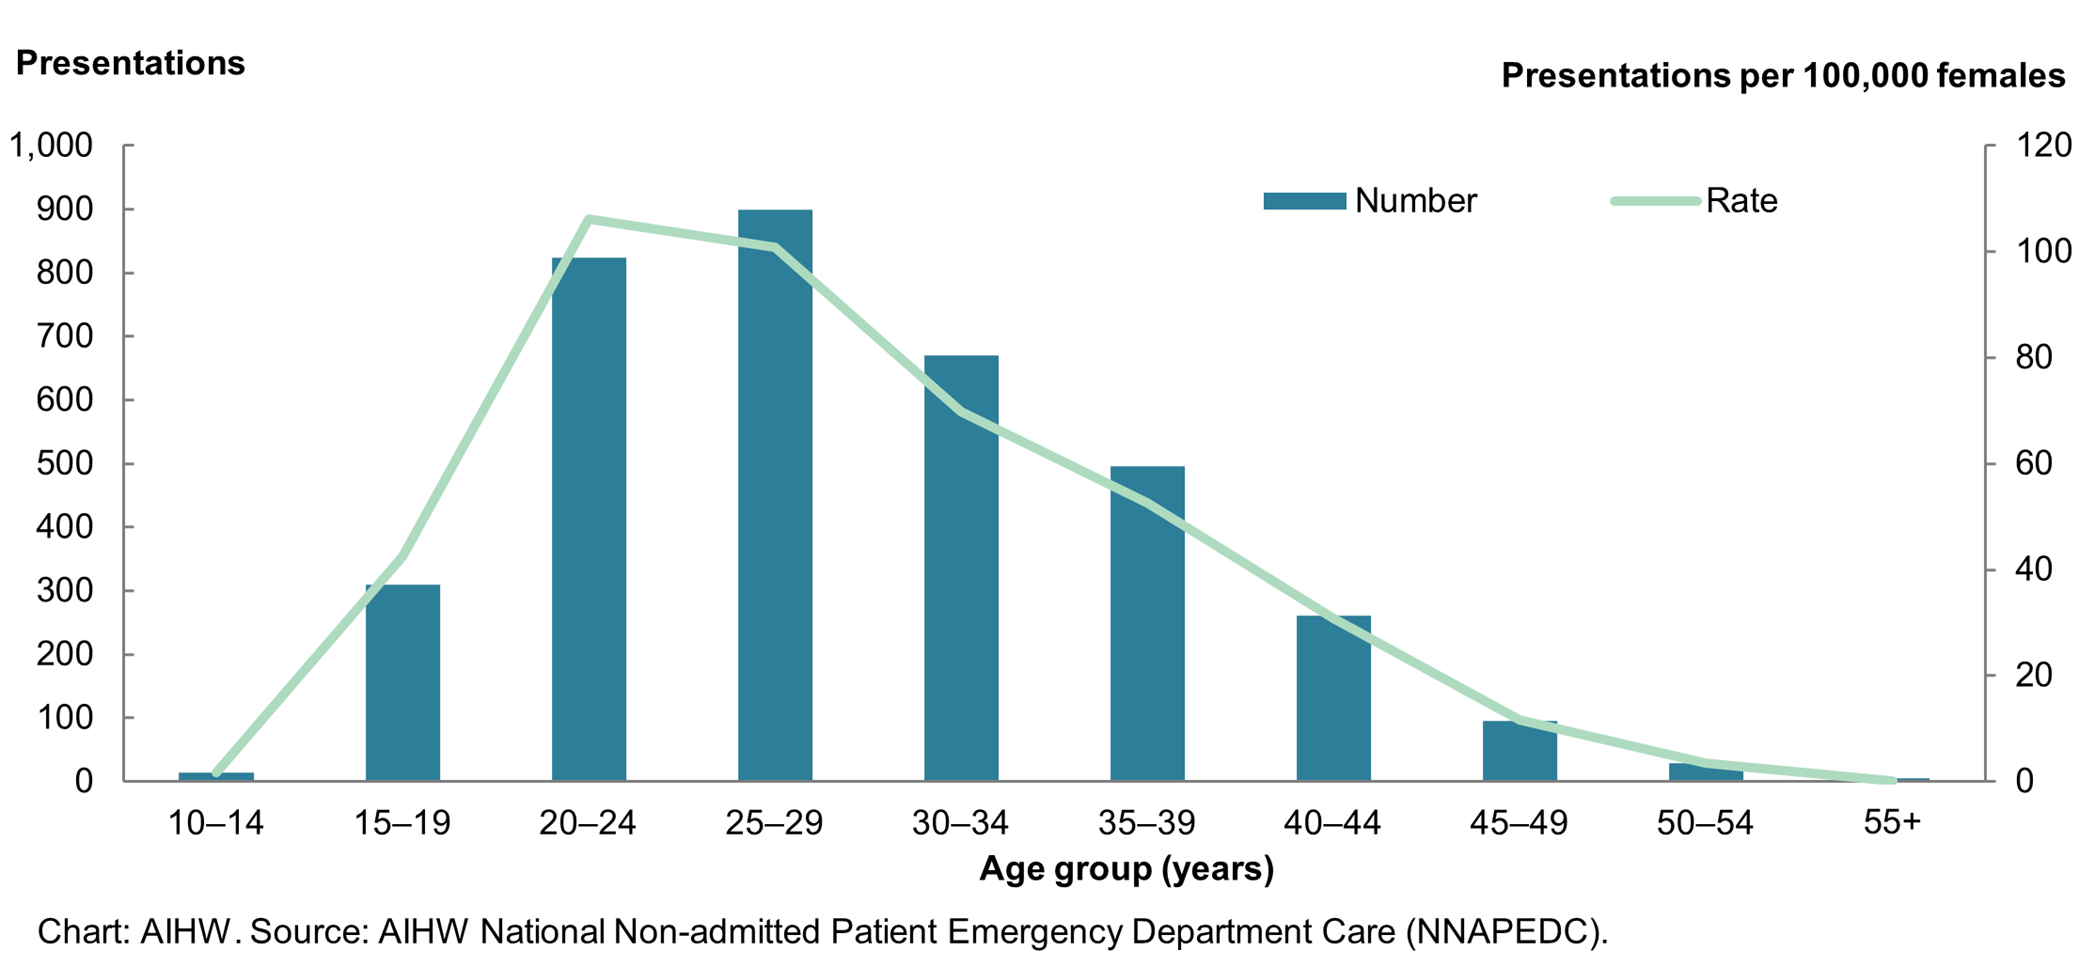 The number of ED presentations increased with age to 25–29 then decreased. The rate of emergency department presentations increased with age to 20–24, then decreased.